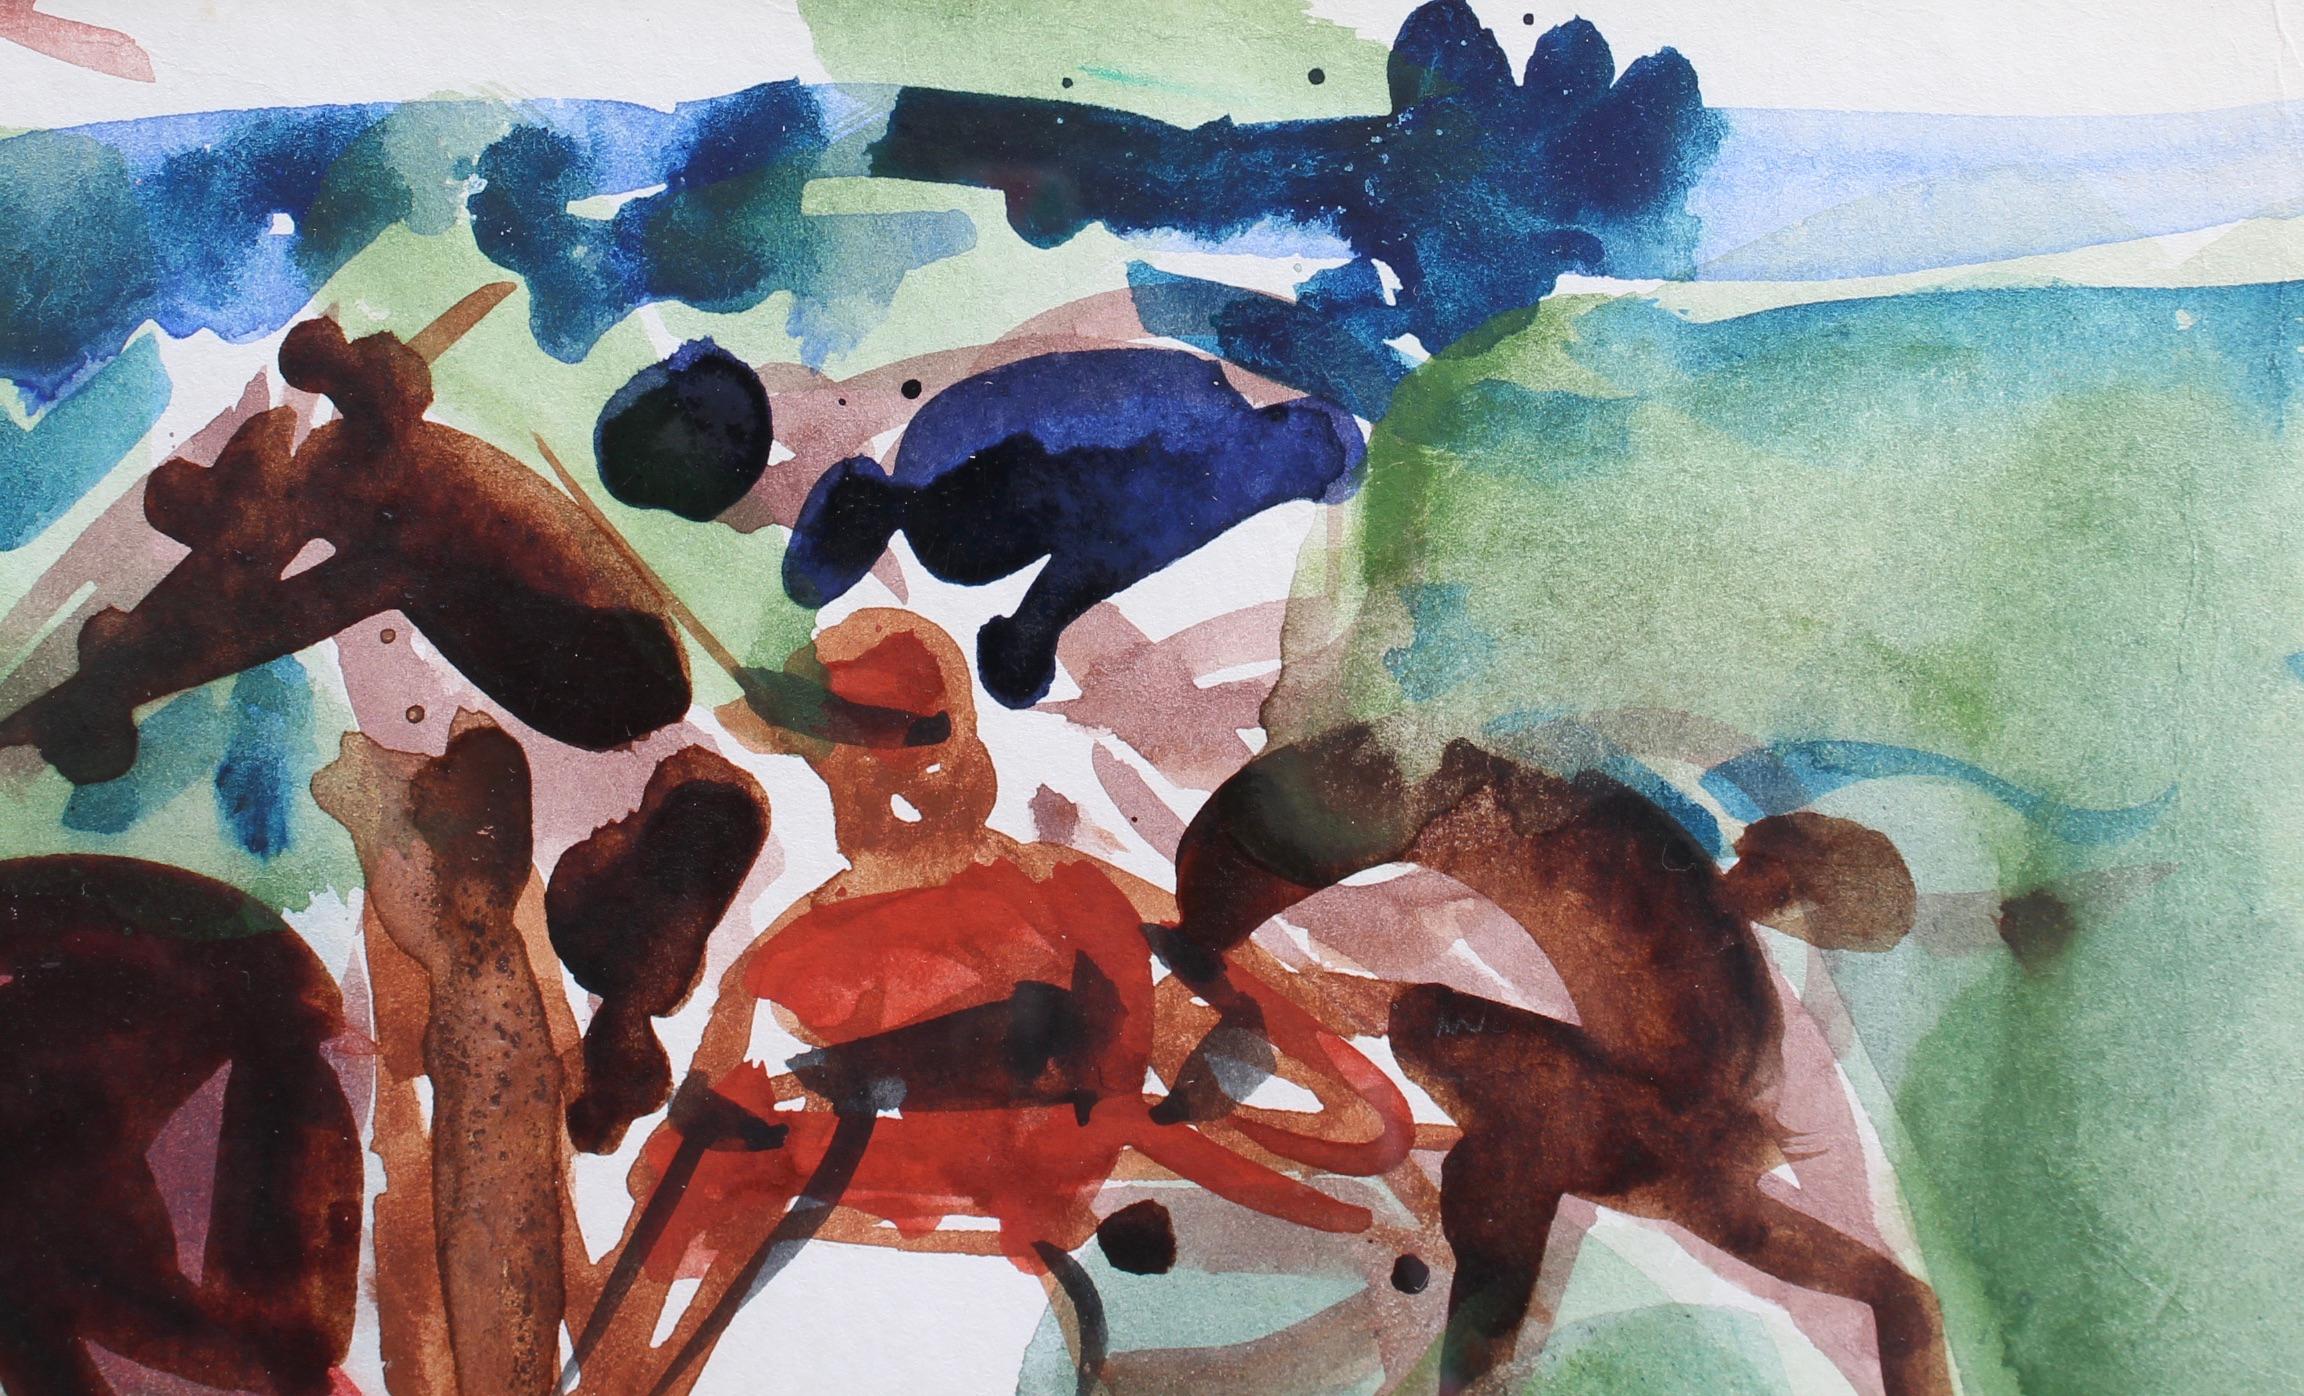 'The Polo Grounds', watercolour on art paper (circa early 1960s), by Pierre Gaillardot. The game of polo - sometimes called 'the sport of kings' - is wildly exciting and played on horseback with two teams of four players each. The players use